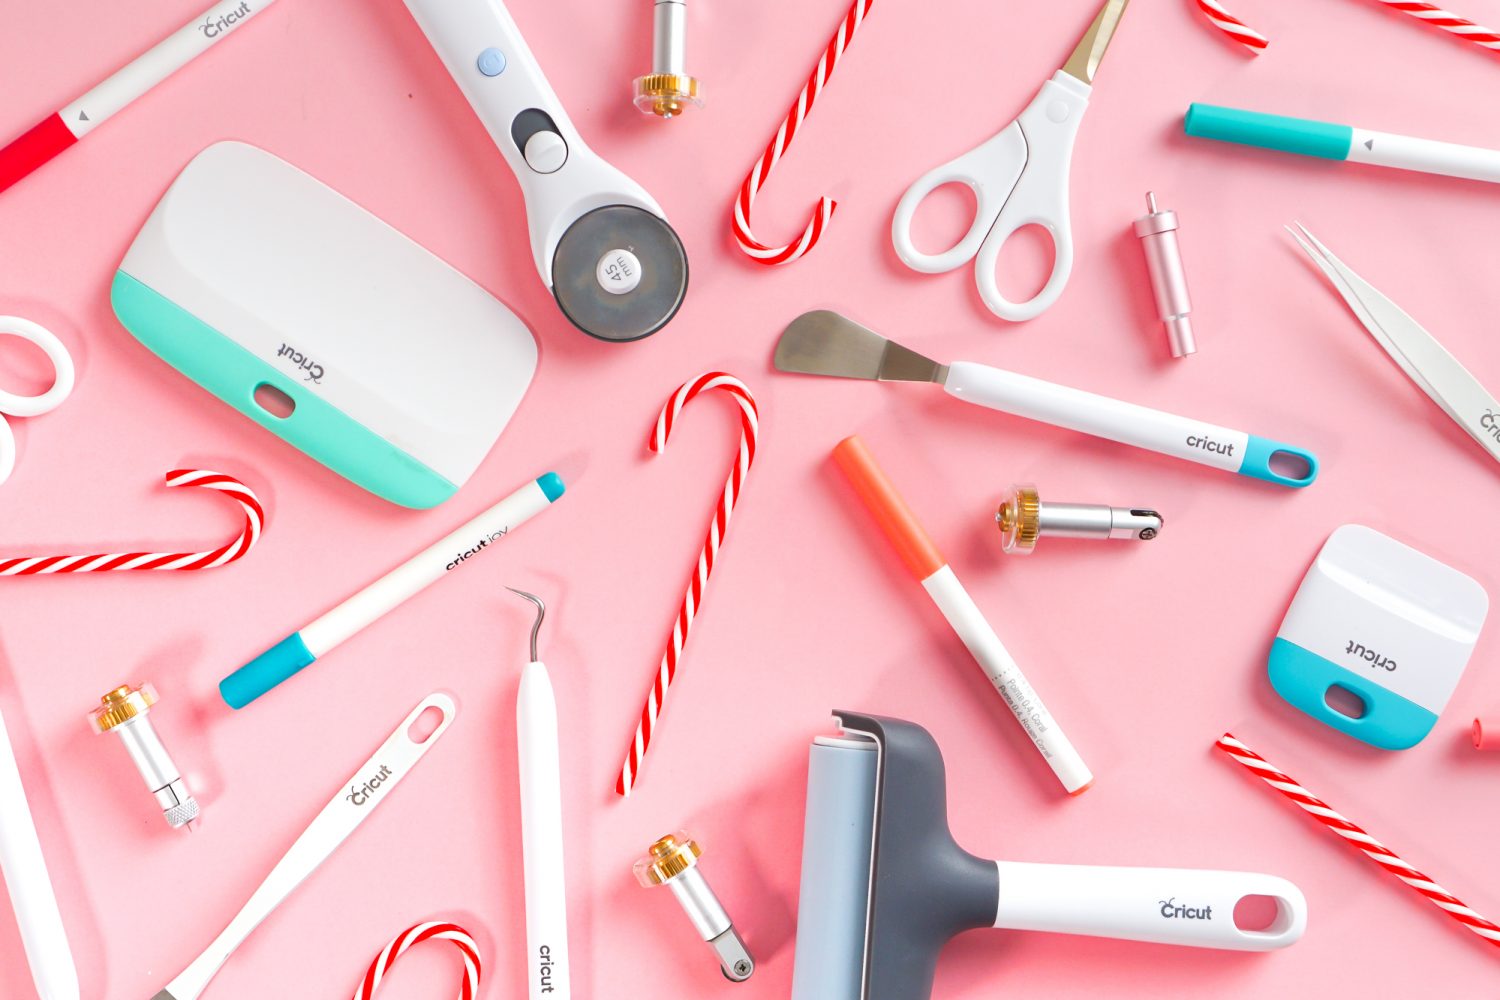 Cricut accessories and candy canes on a pink background